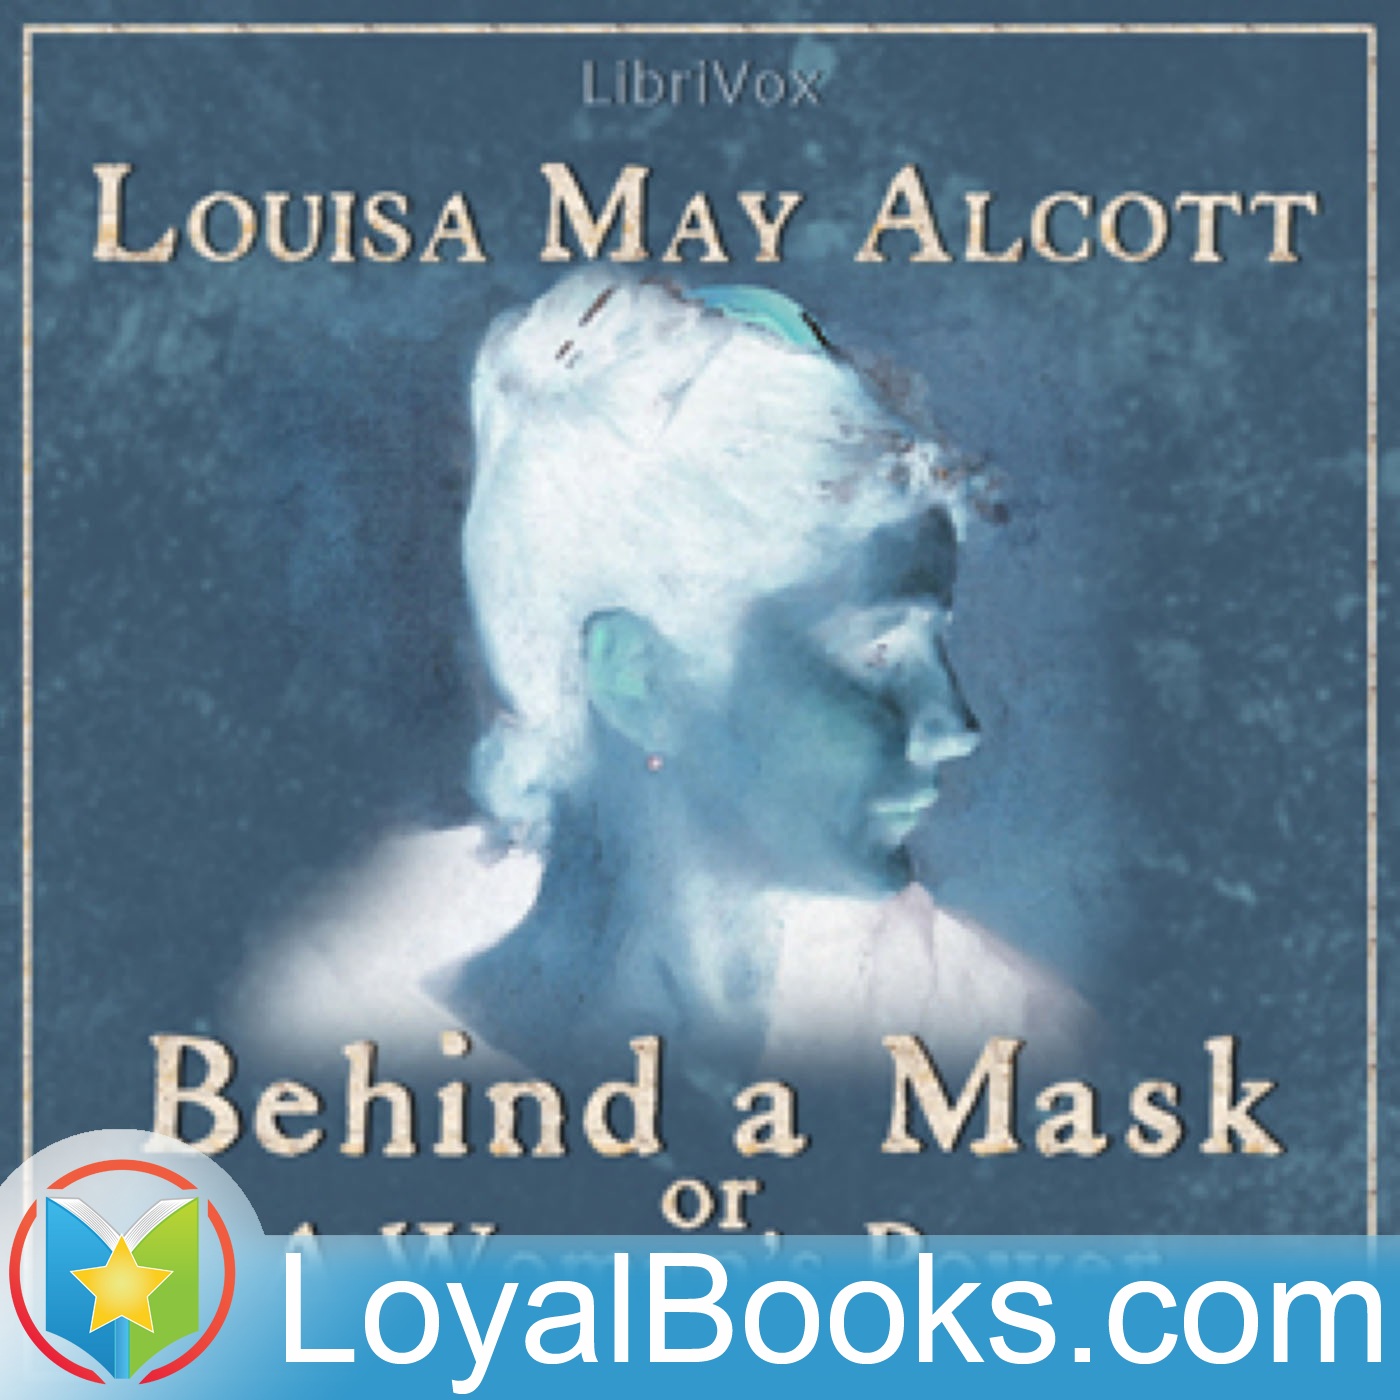 Behind a Mask, or a Woman's Power by Louisa May Alcott